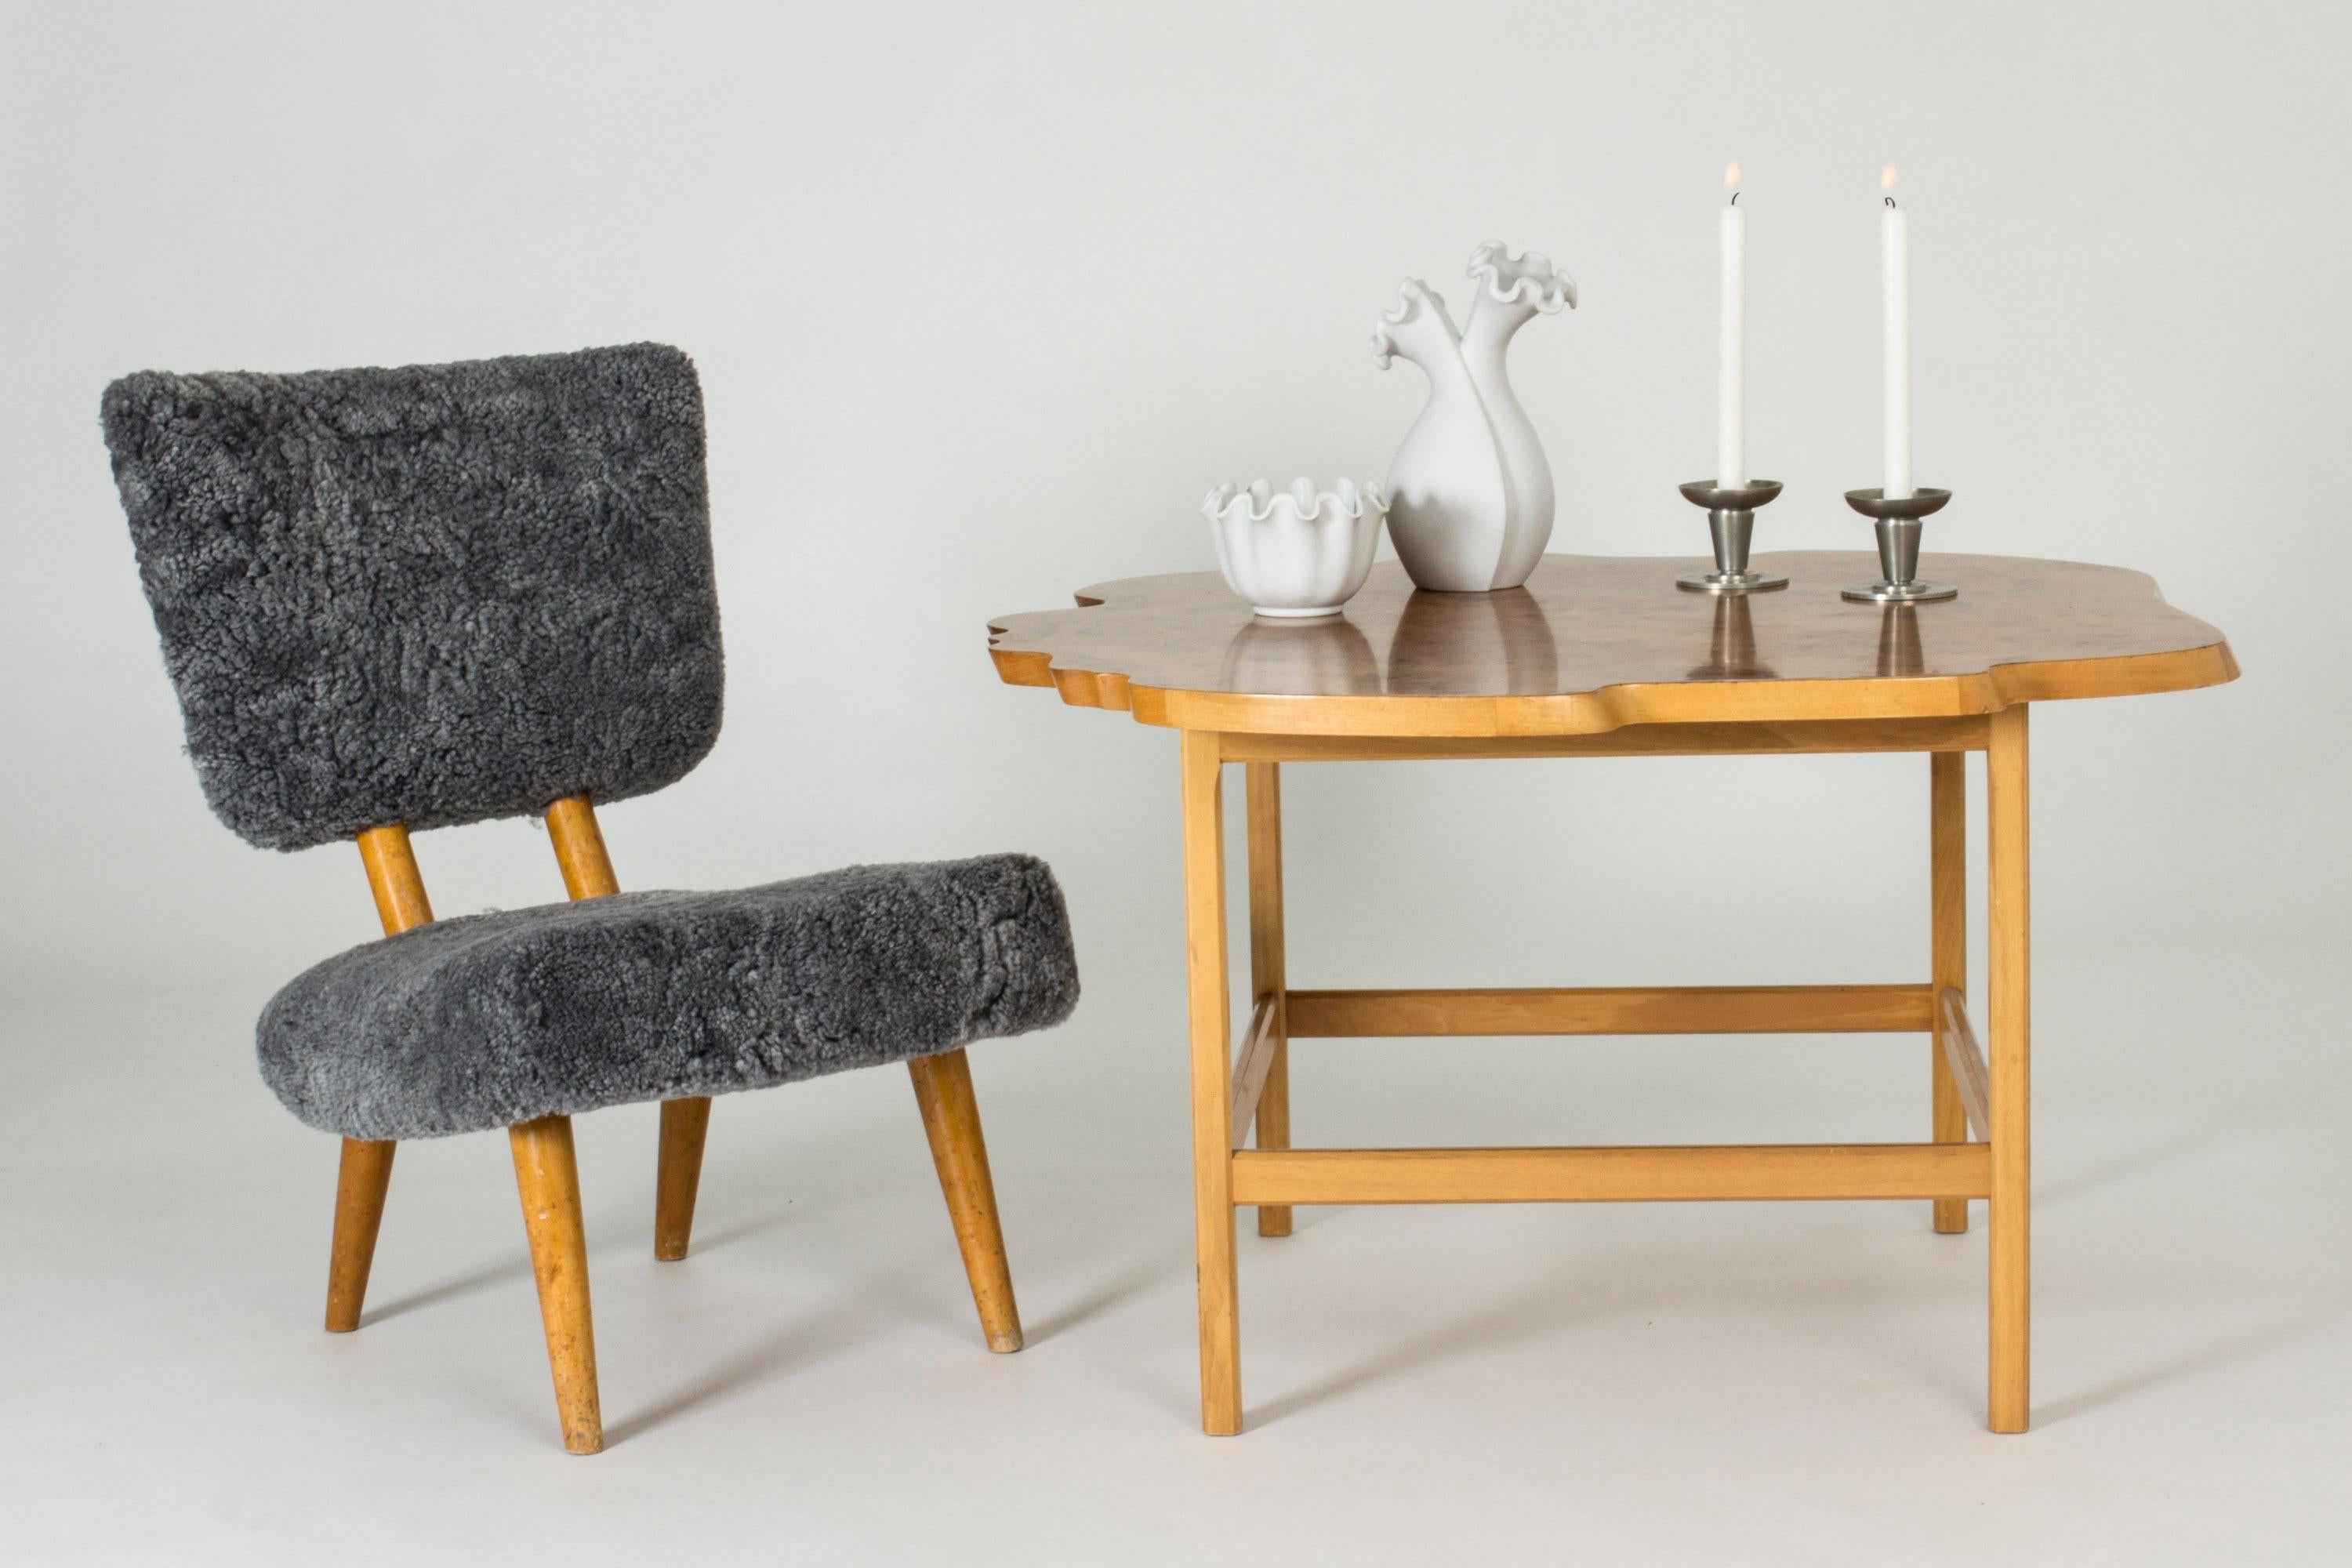 Striking coffee table by Josef Frank with a birch frame and beautiful alder root tabletop. Organic silhouette that imitates the shape of a tree trunk.